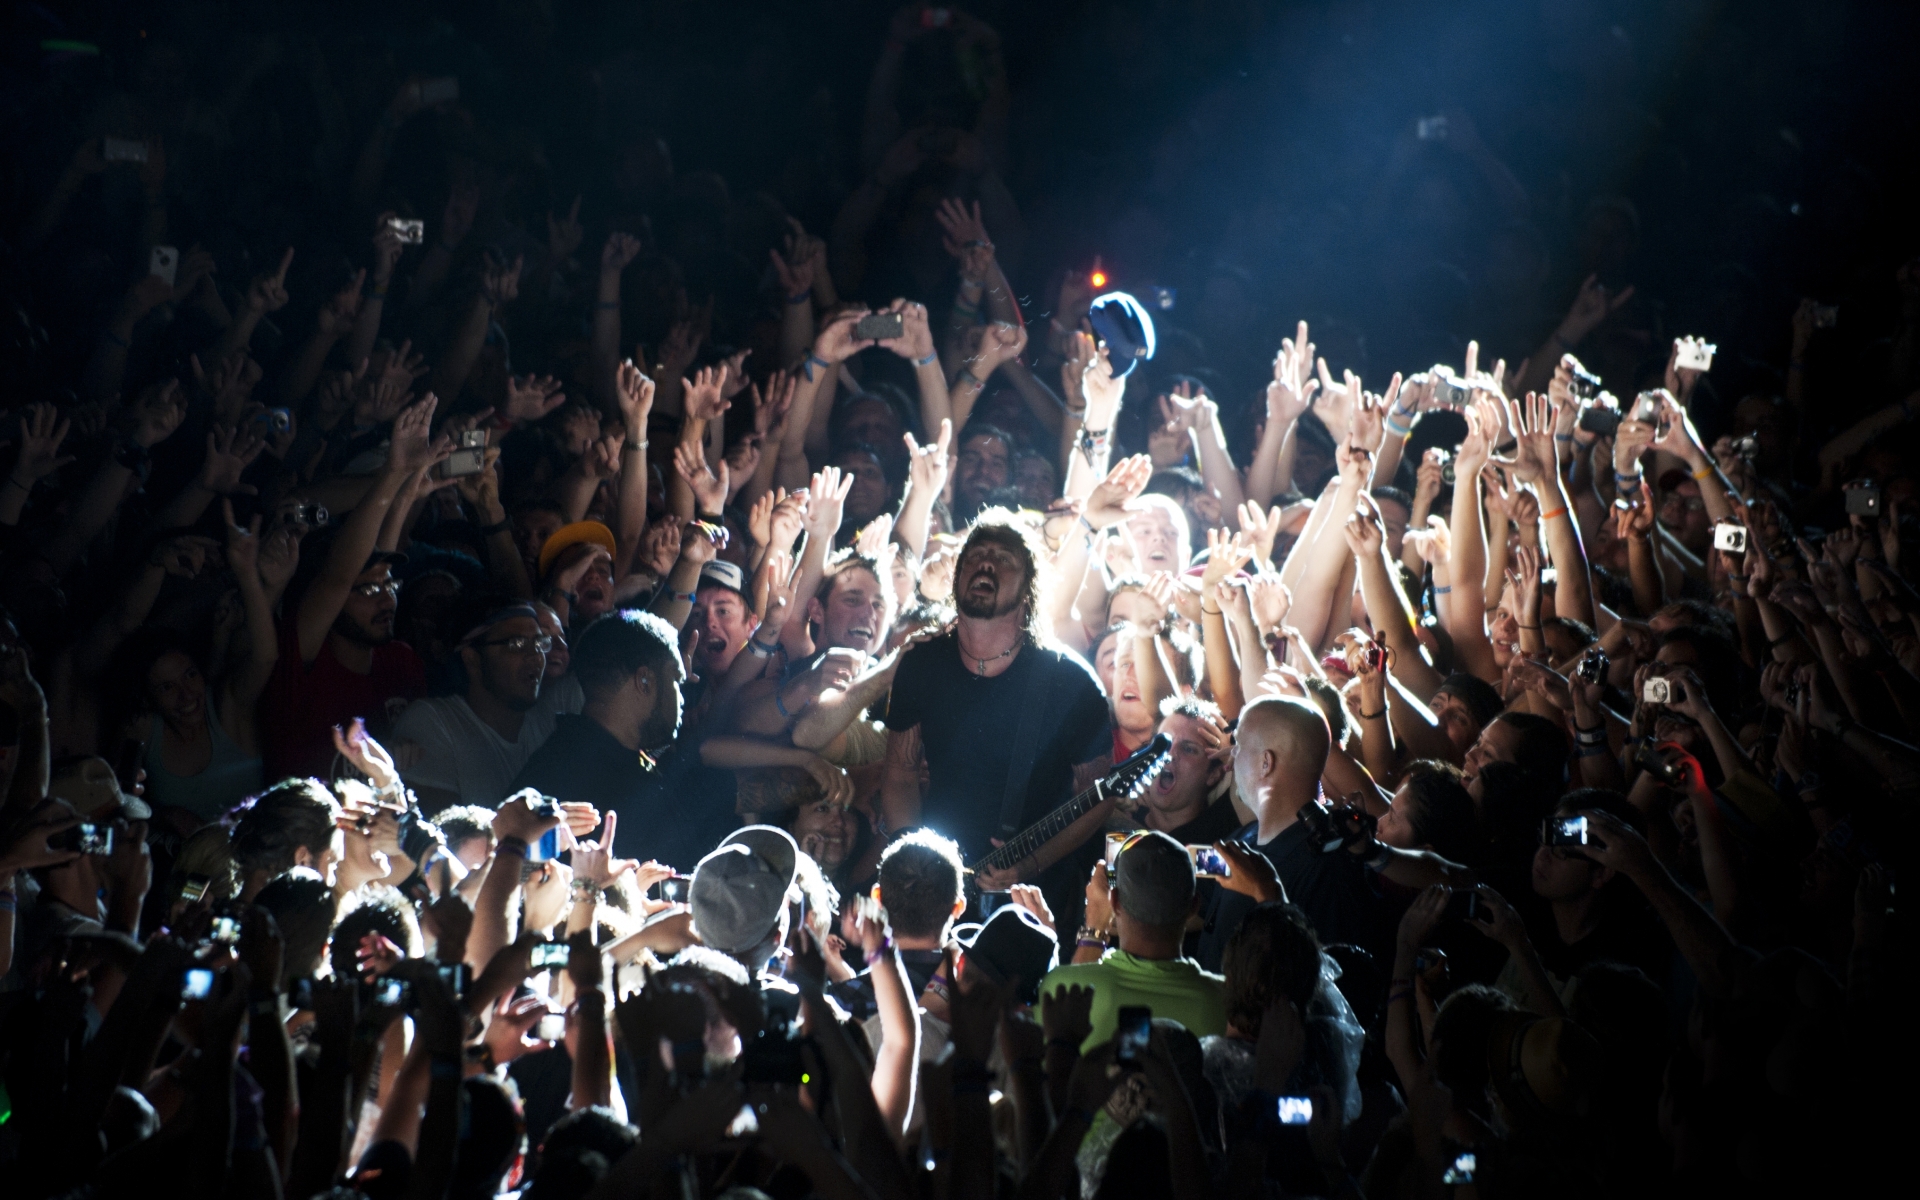 music, foo fighters, concert, crowd, hand cellphone